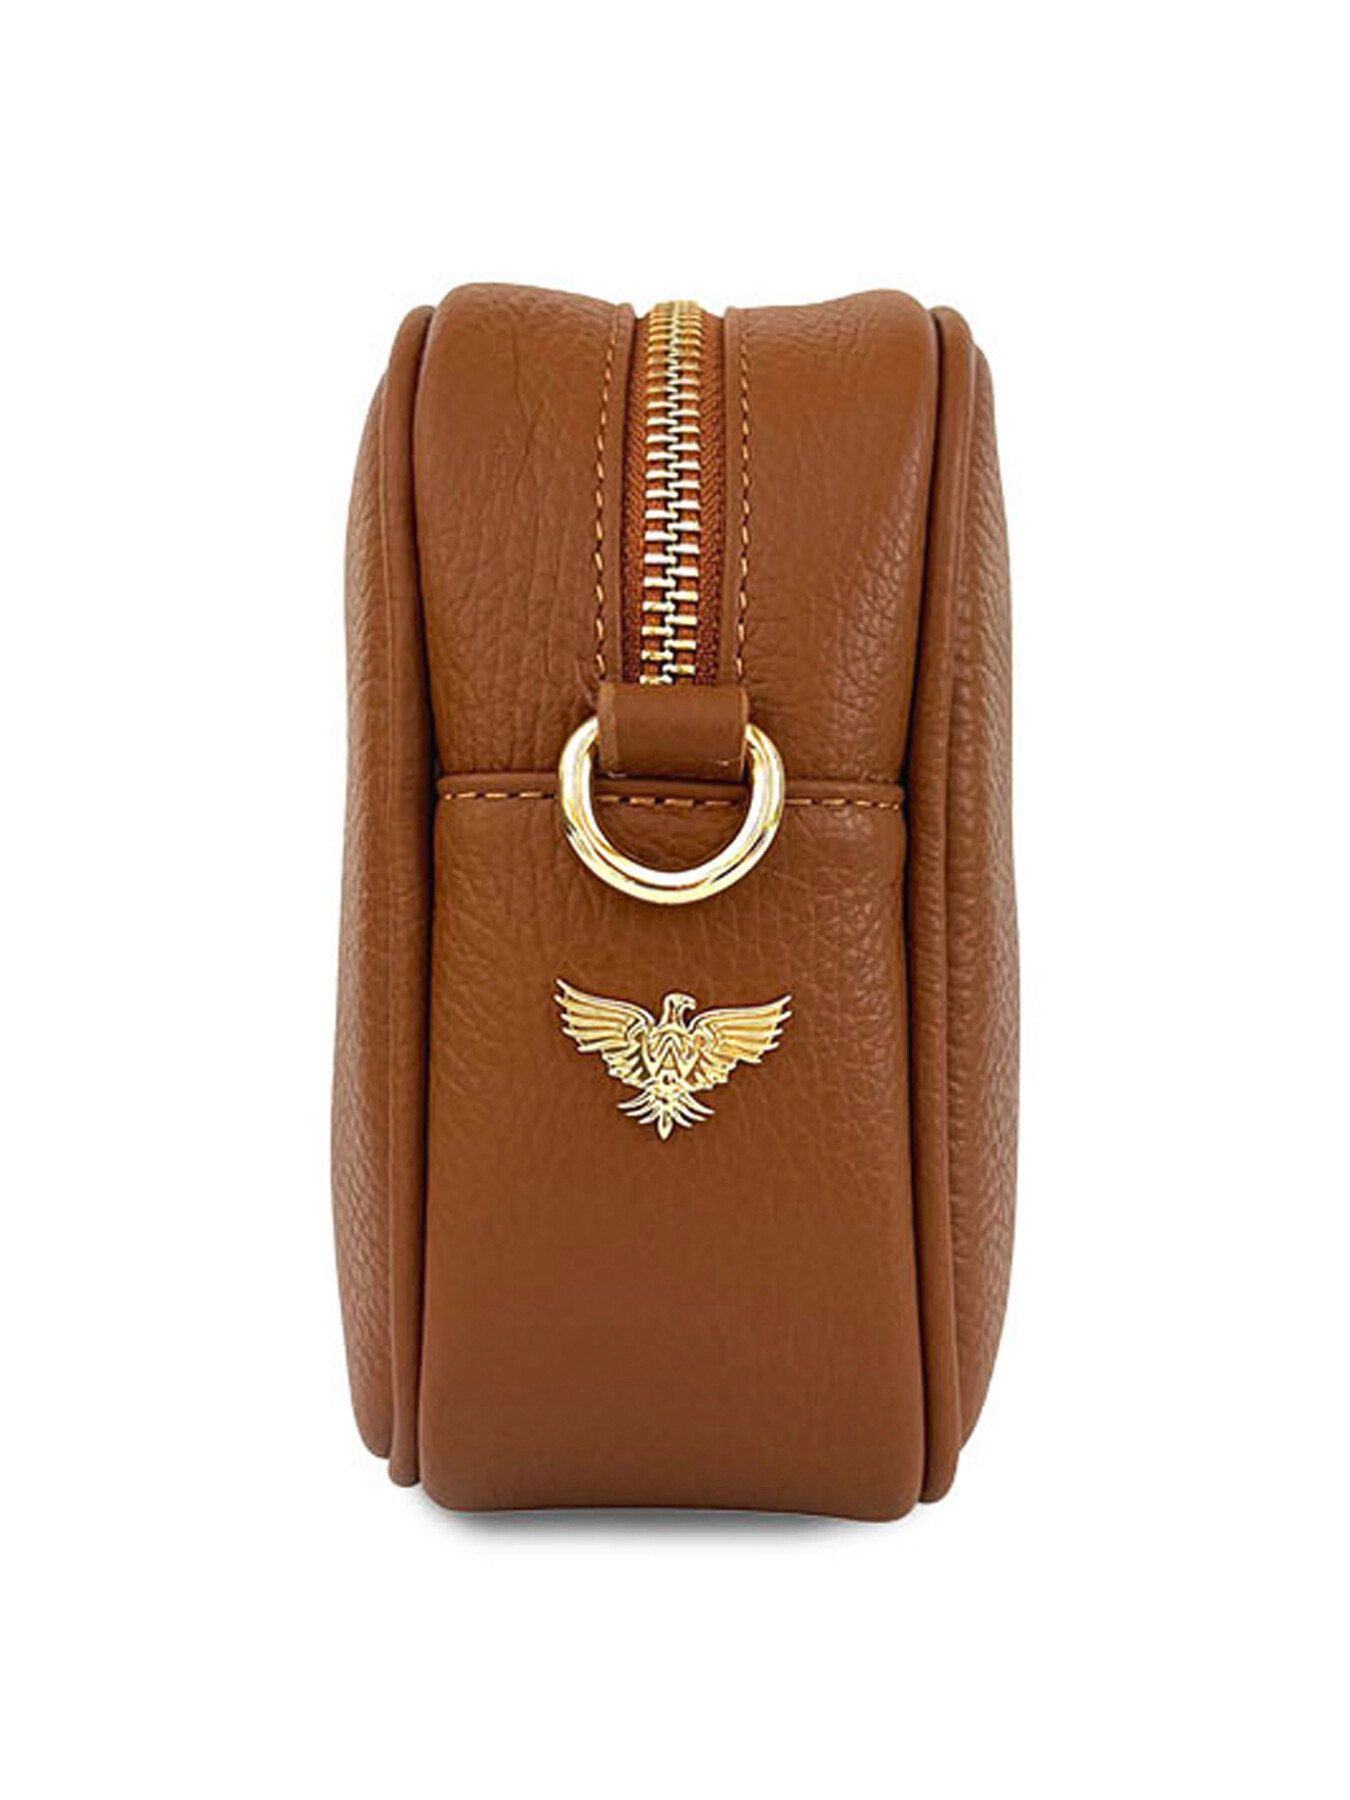 Tan Leather Crossbody Bag With Tan Cheetah Strap – Apatchy London